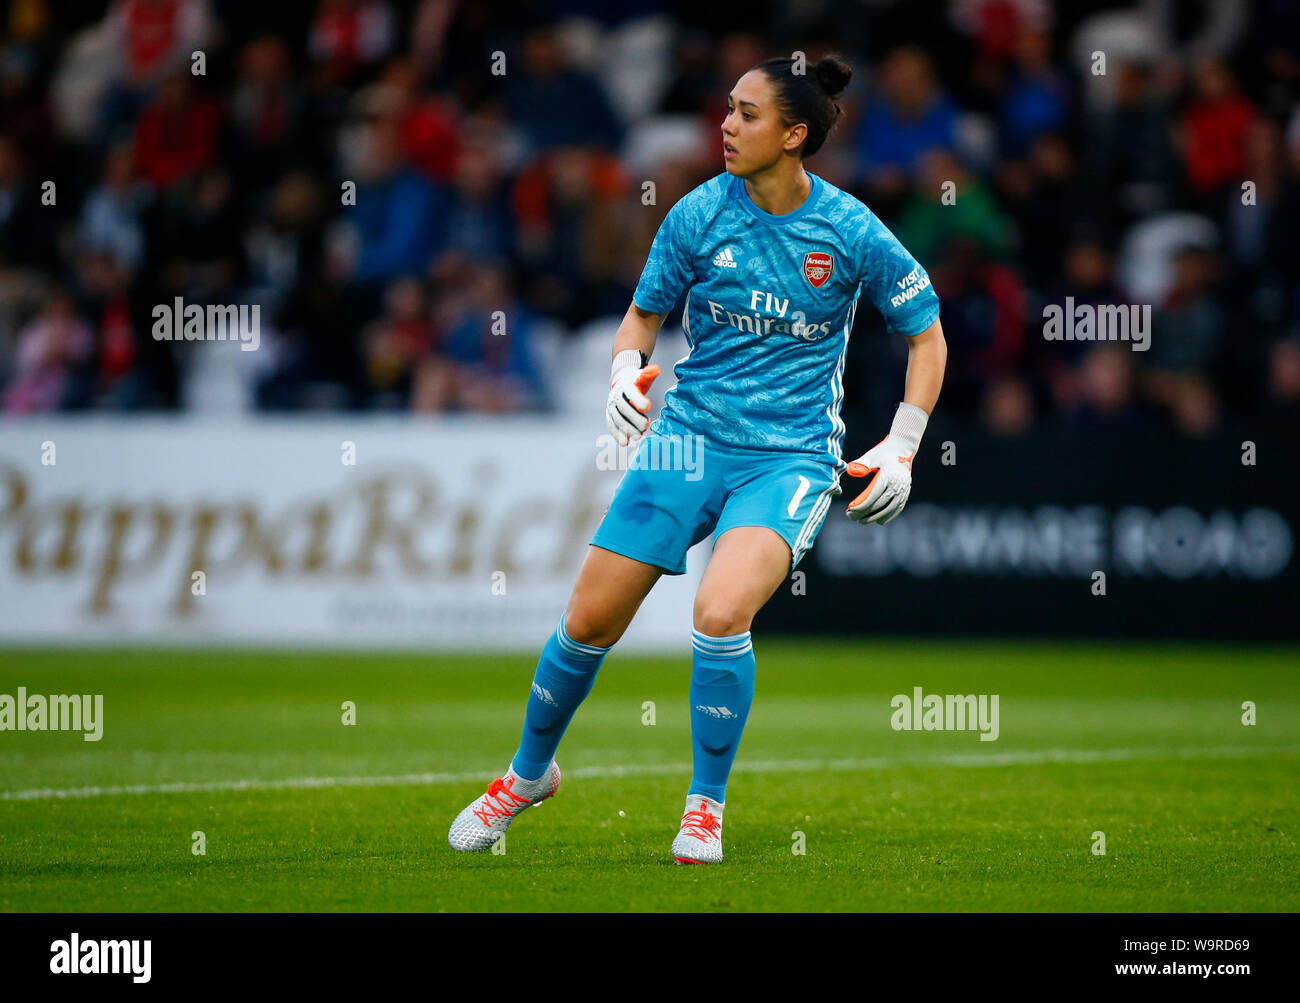 Boreham Wood, UK. 14th Aug, 2019. BOREHAMWOOD, ENGLAND - AUGUST 14: Manuela Zinsberger of Arsenal during the pre-season friendly match between Arsenal and Barcelona Women at Meadow Park on August 14, 2019 in Borehamwood, England. Credit: Action Foto Sport/Alamy Live News Stock Photo